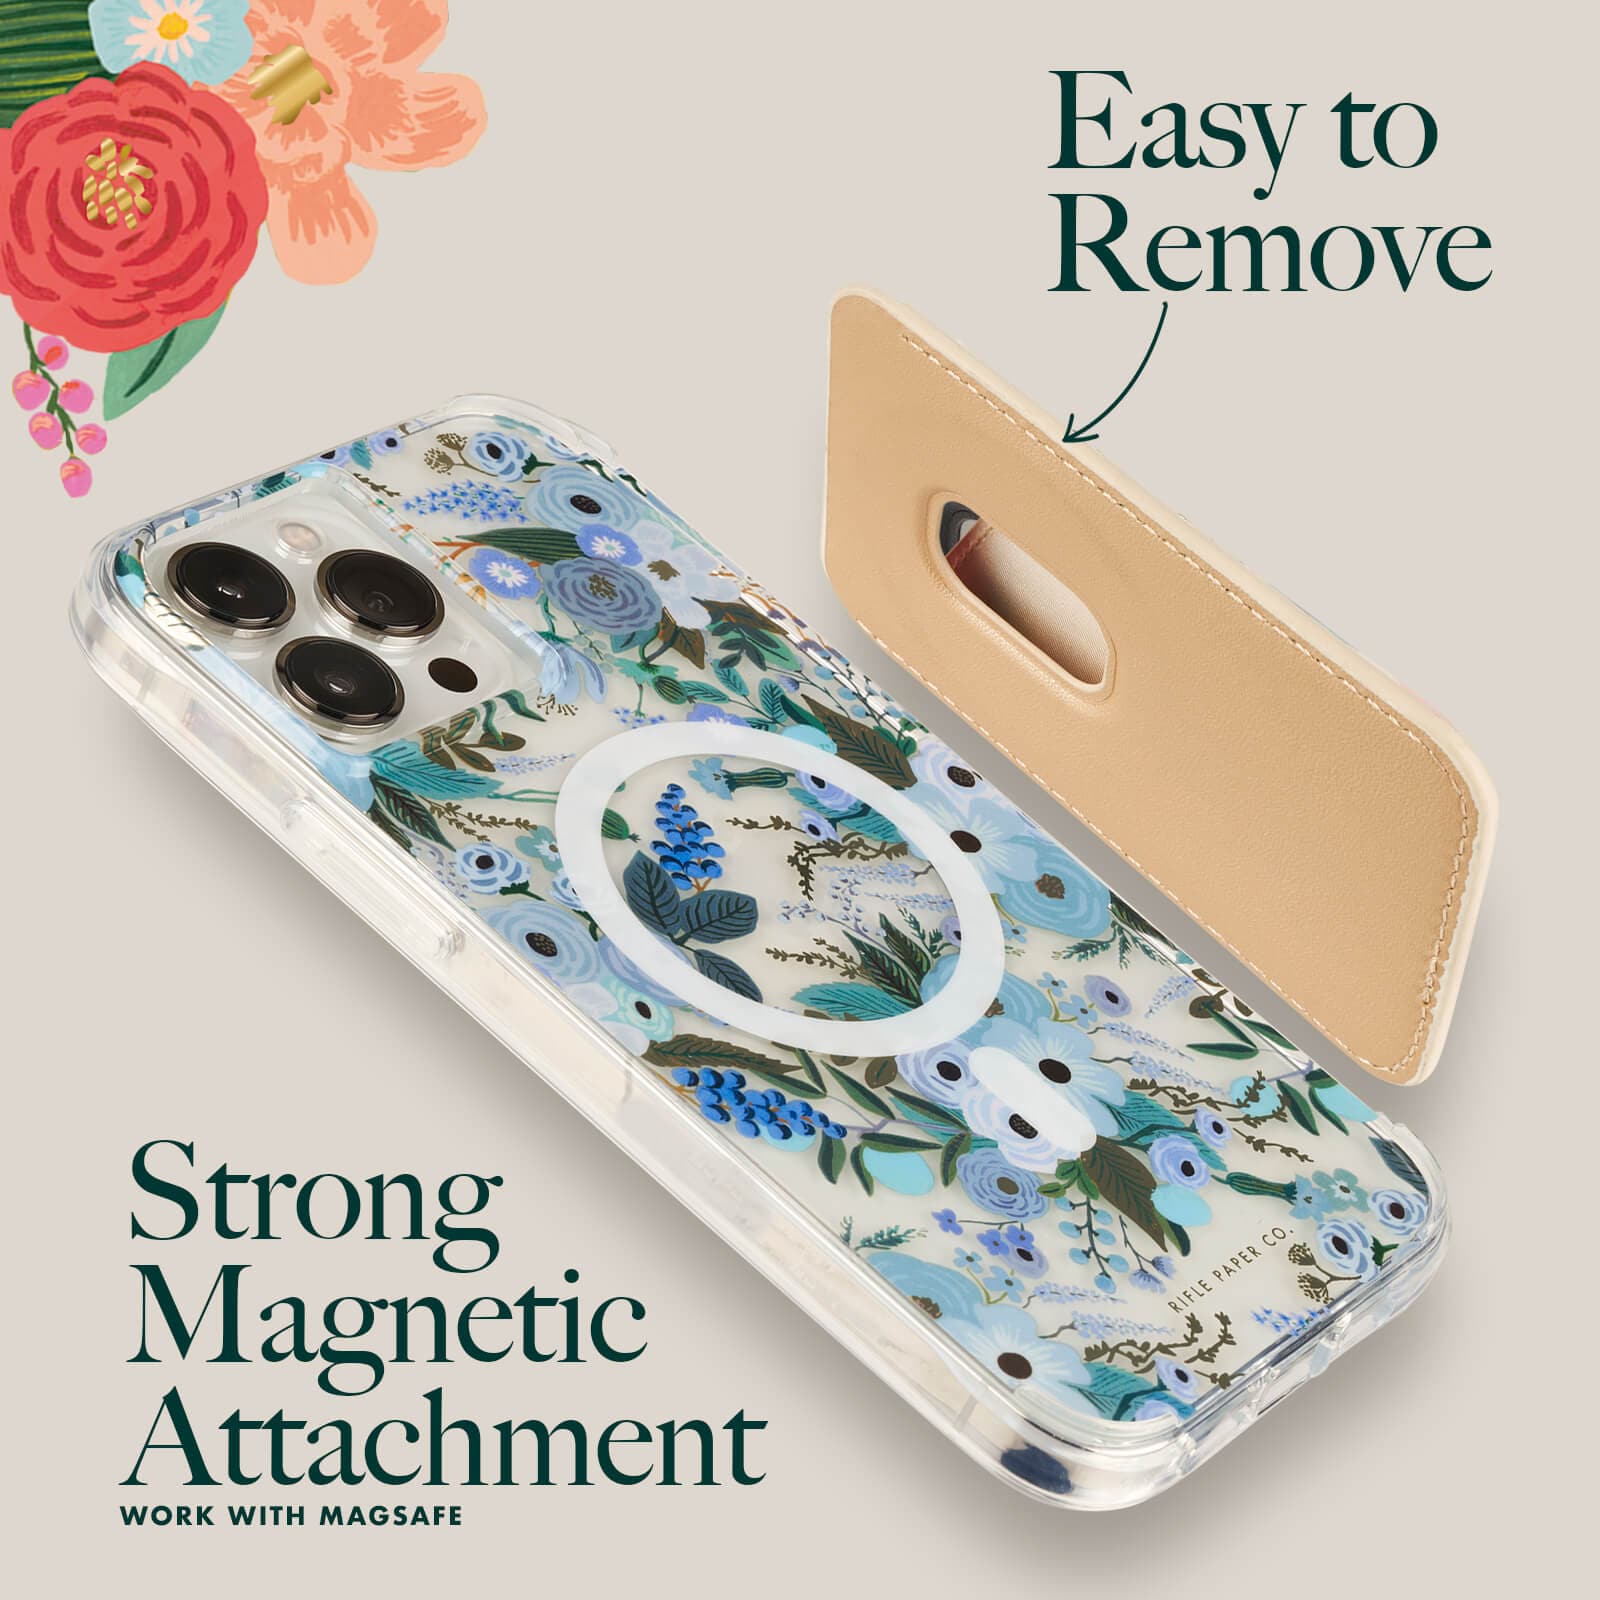 EASY TO REMOVE, STRONG MAGNETIC ATTACHMENT WORK WITH MAGSAFE. COLOR::GARDEN PARTY BLUSH